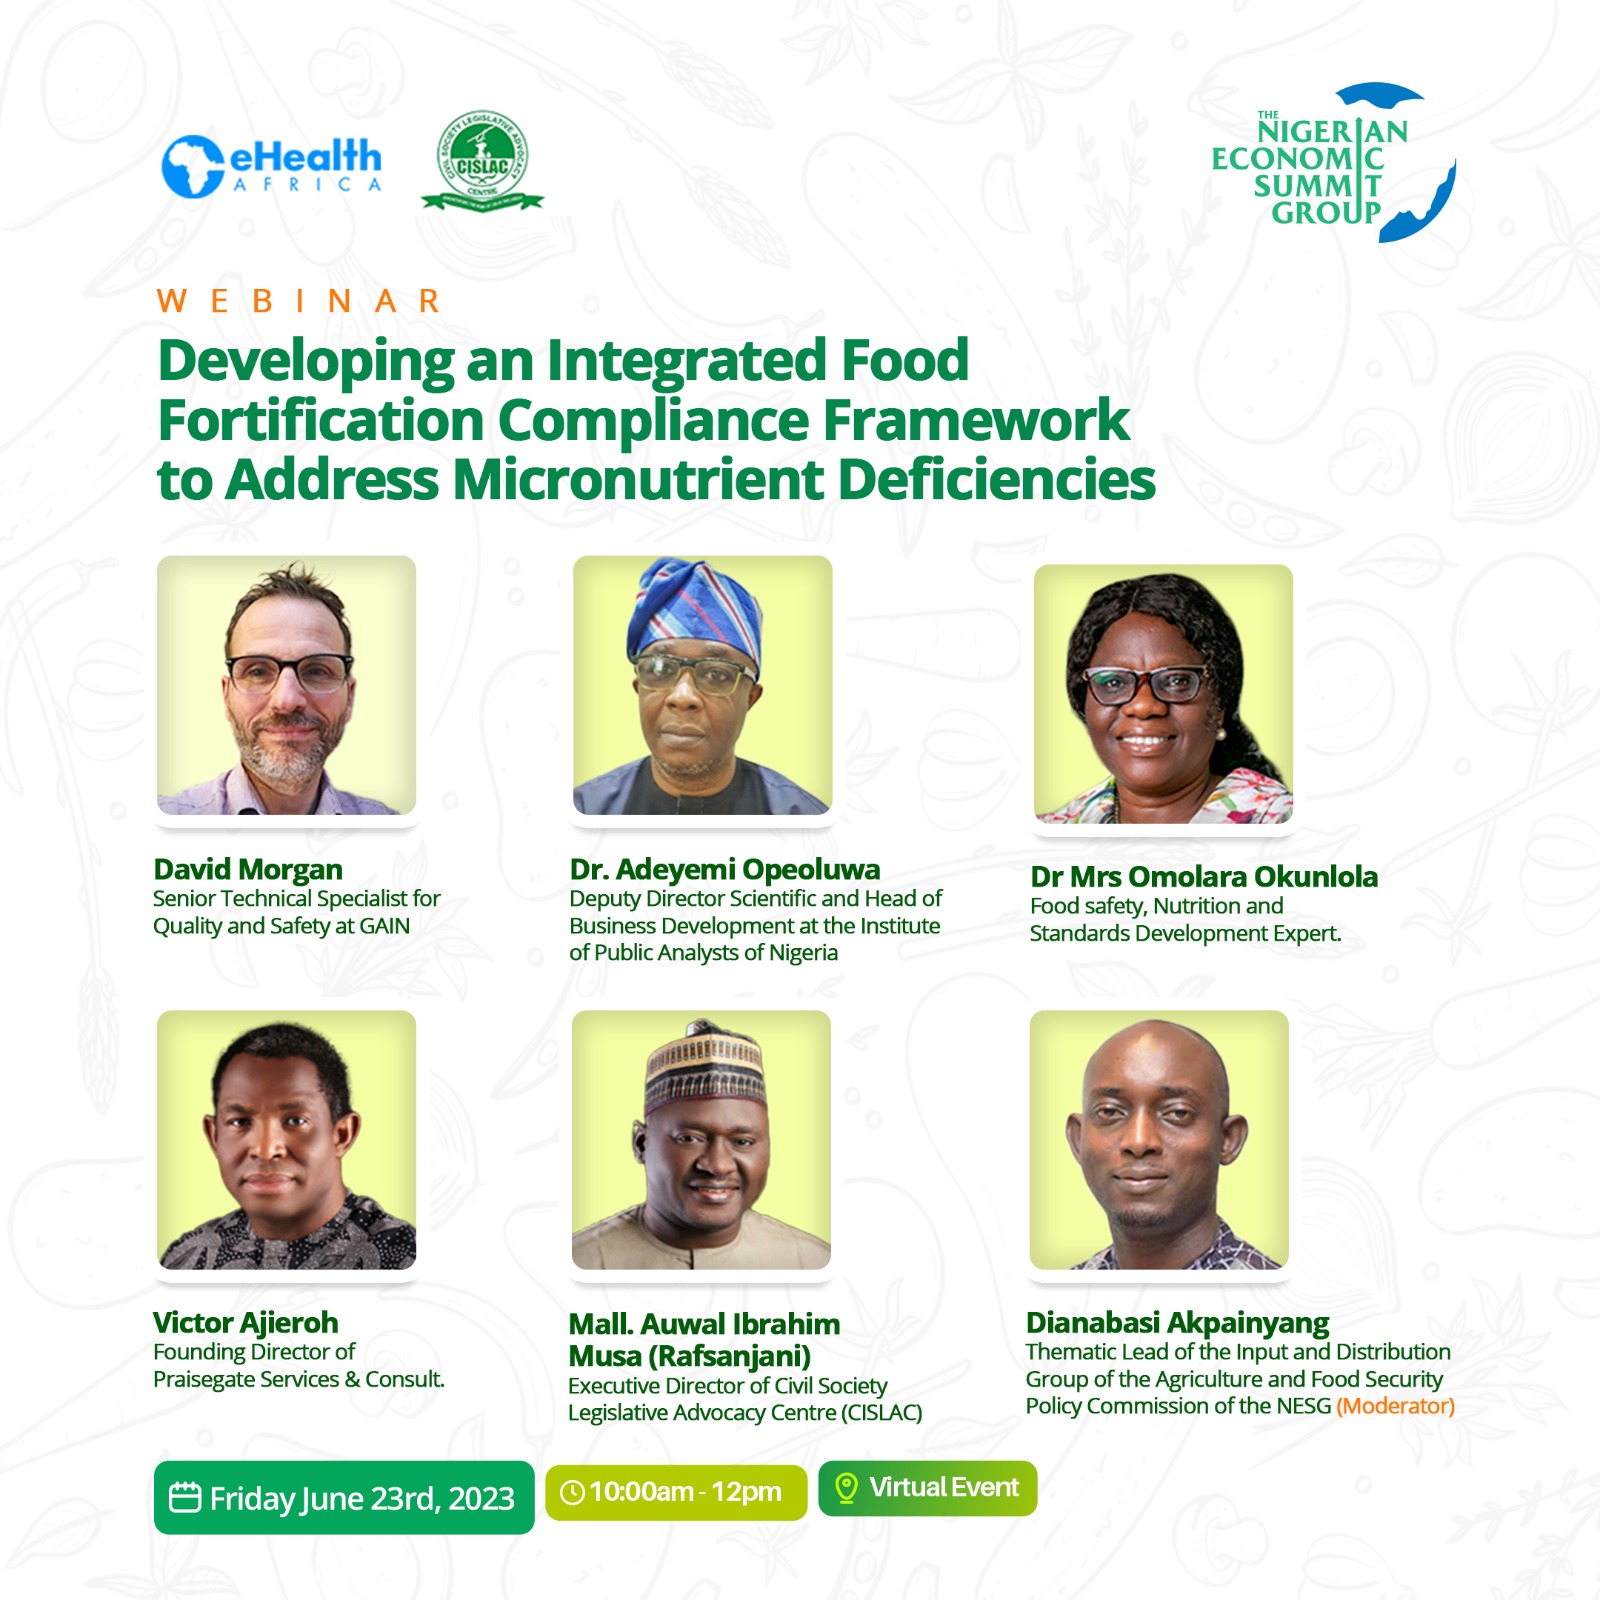 NESG Holds Webinar on Developing an Integrated Food Fortification Compliance Framework to Address Micronutrient Deficiencies